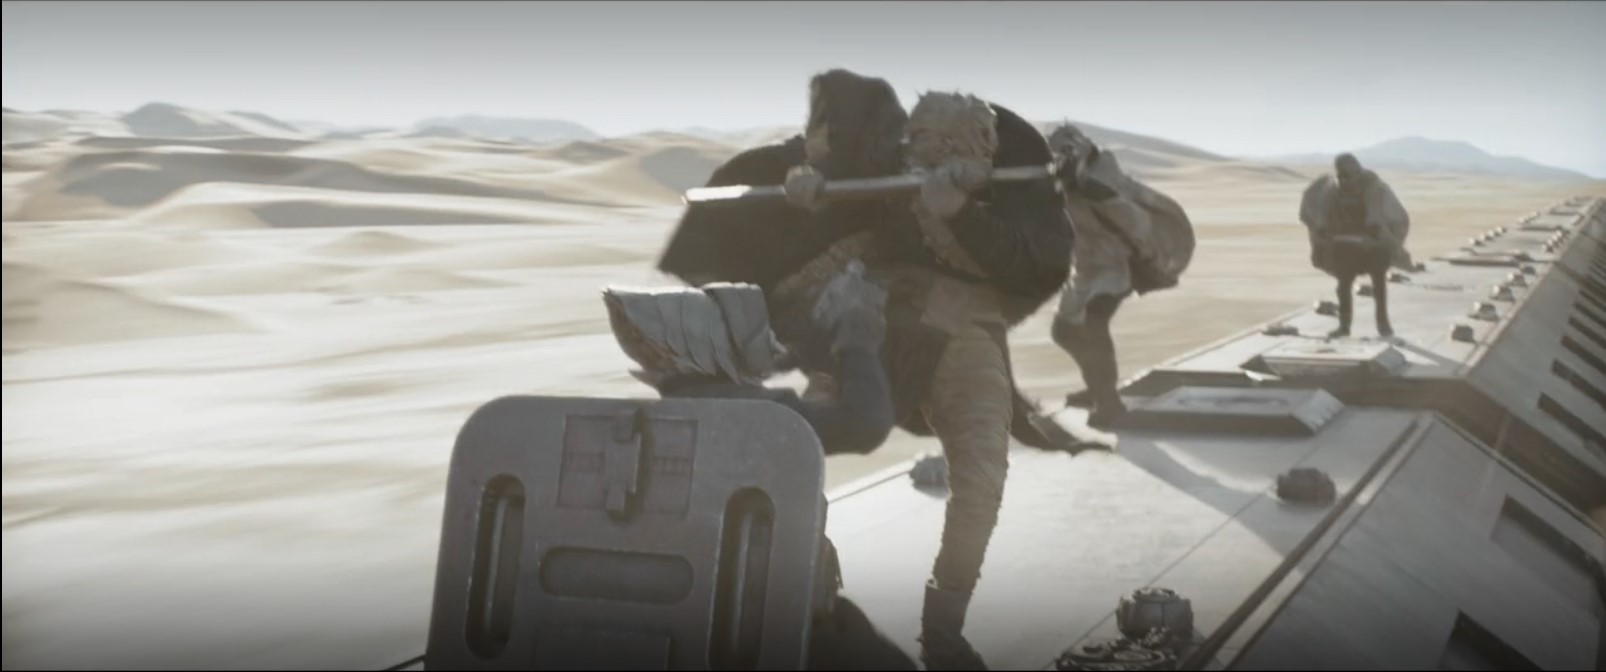 PS soldier attempts to use his A280 CFE pistol on The Tusken Raider during the train battle in "The Tribes of Tatooine"